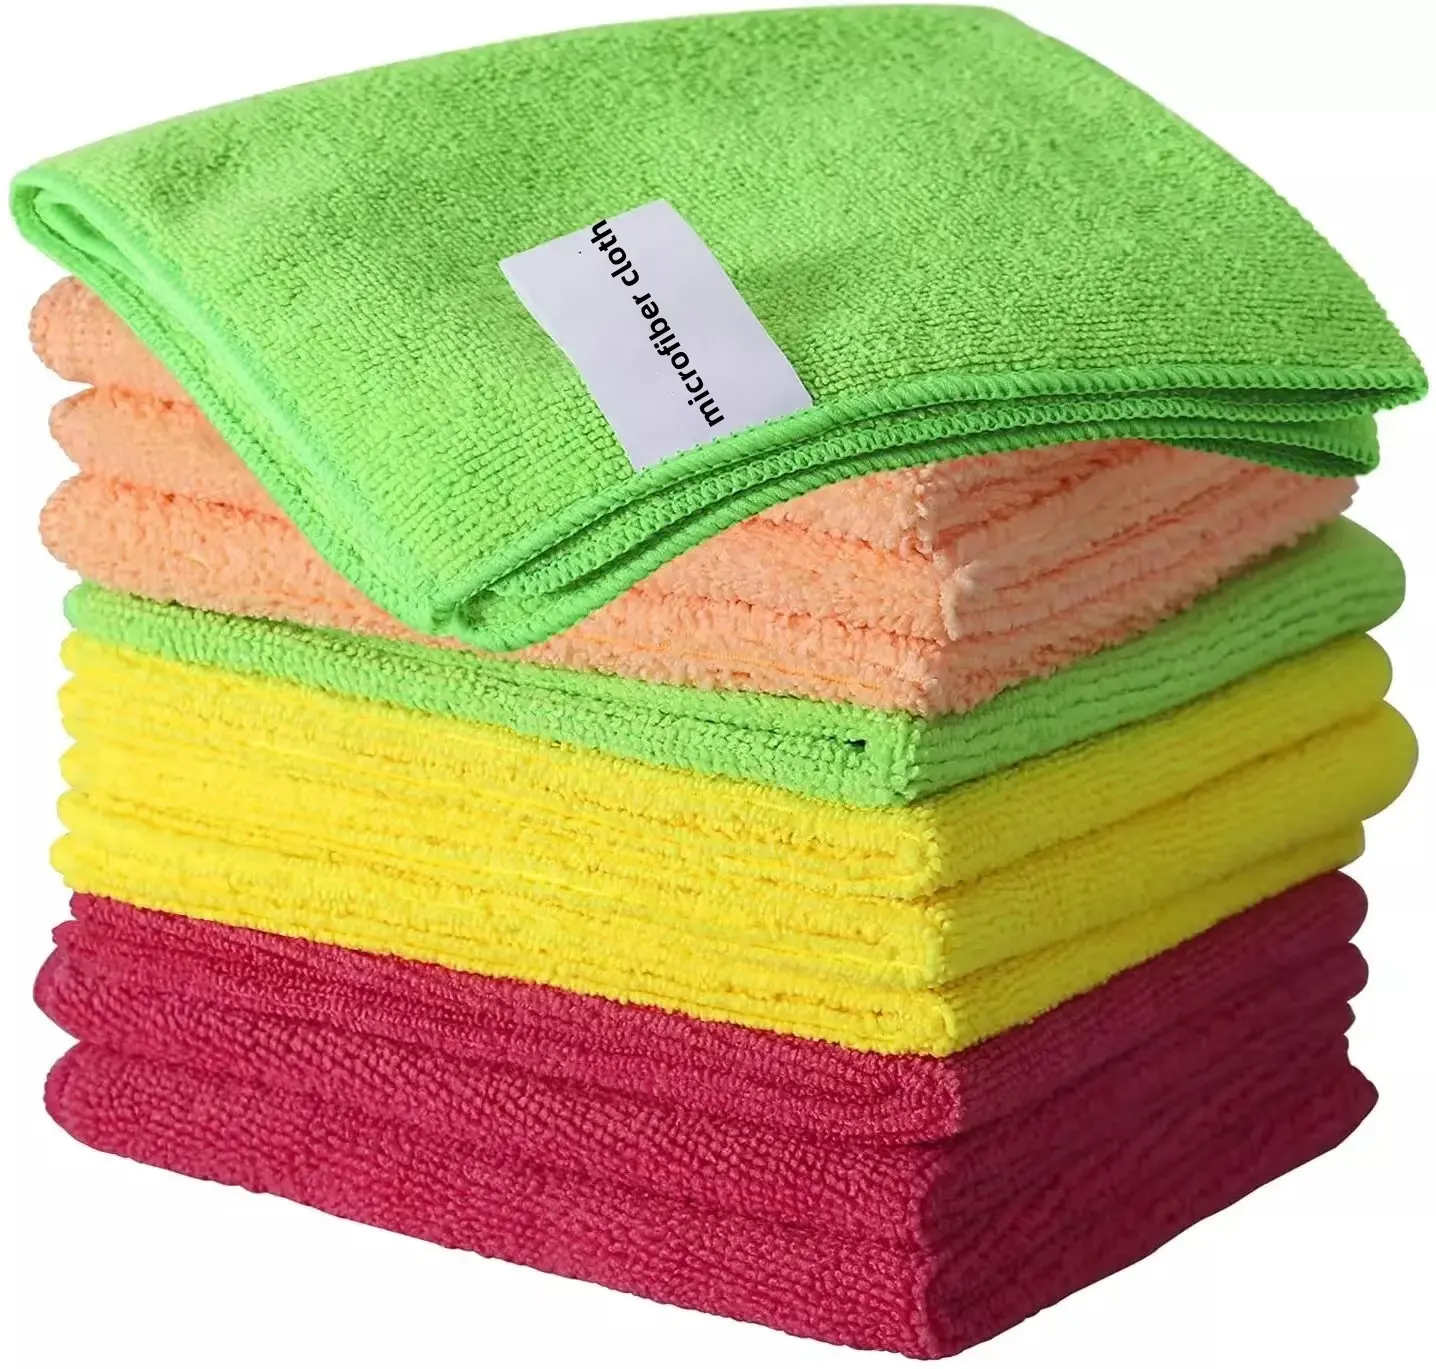 50 Pack Hot Sale Multicoloured Microfiber Cleaning Cloth Set for Kitchen Dish Cleaning